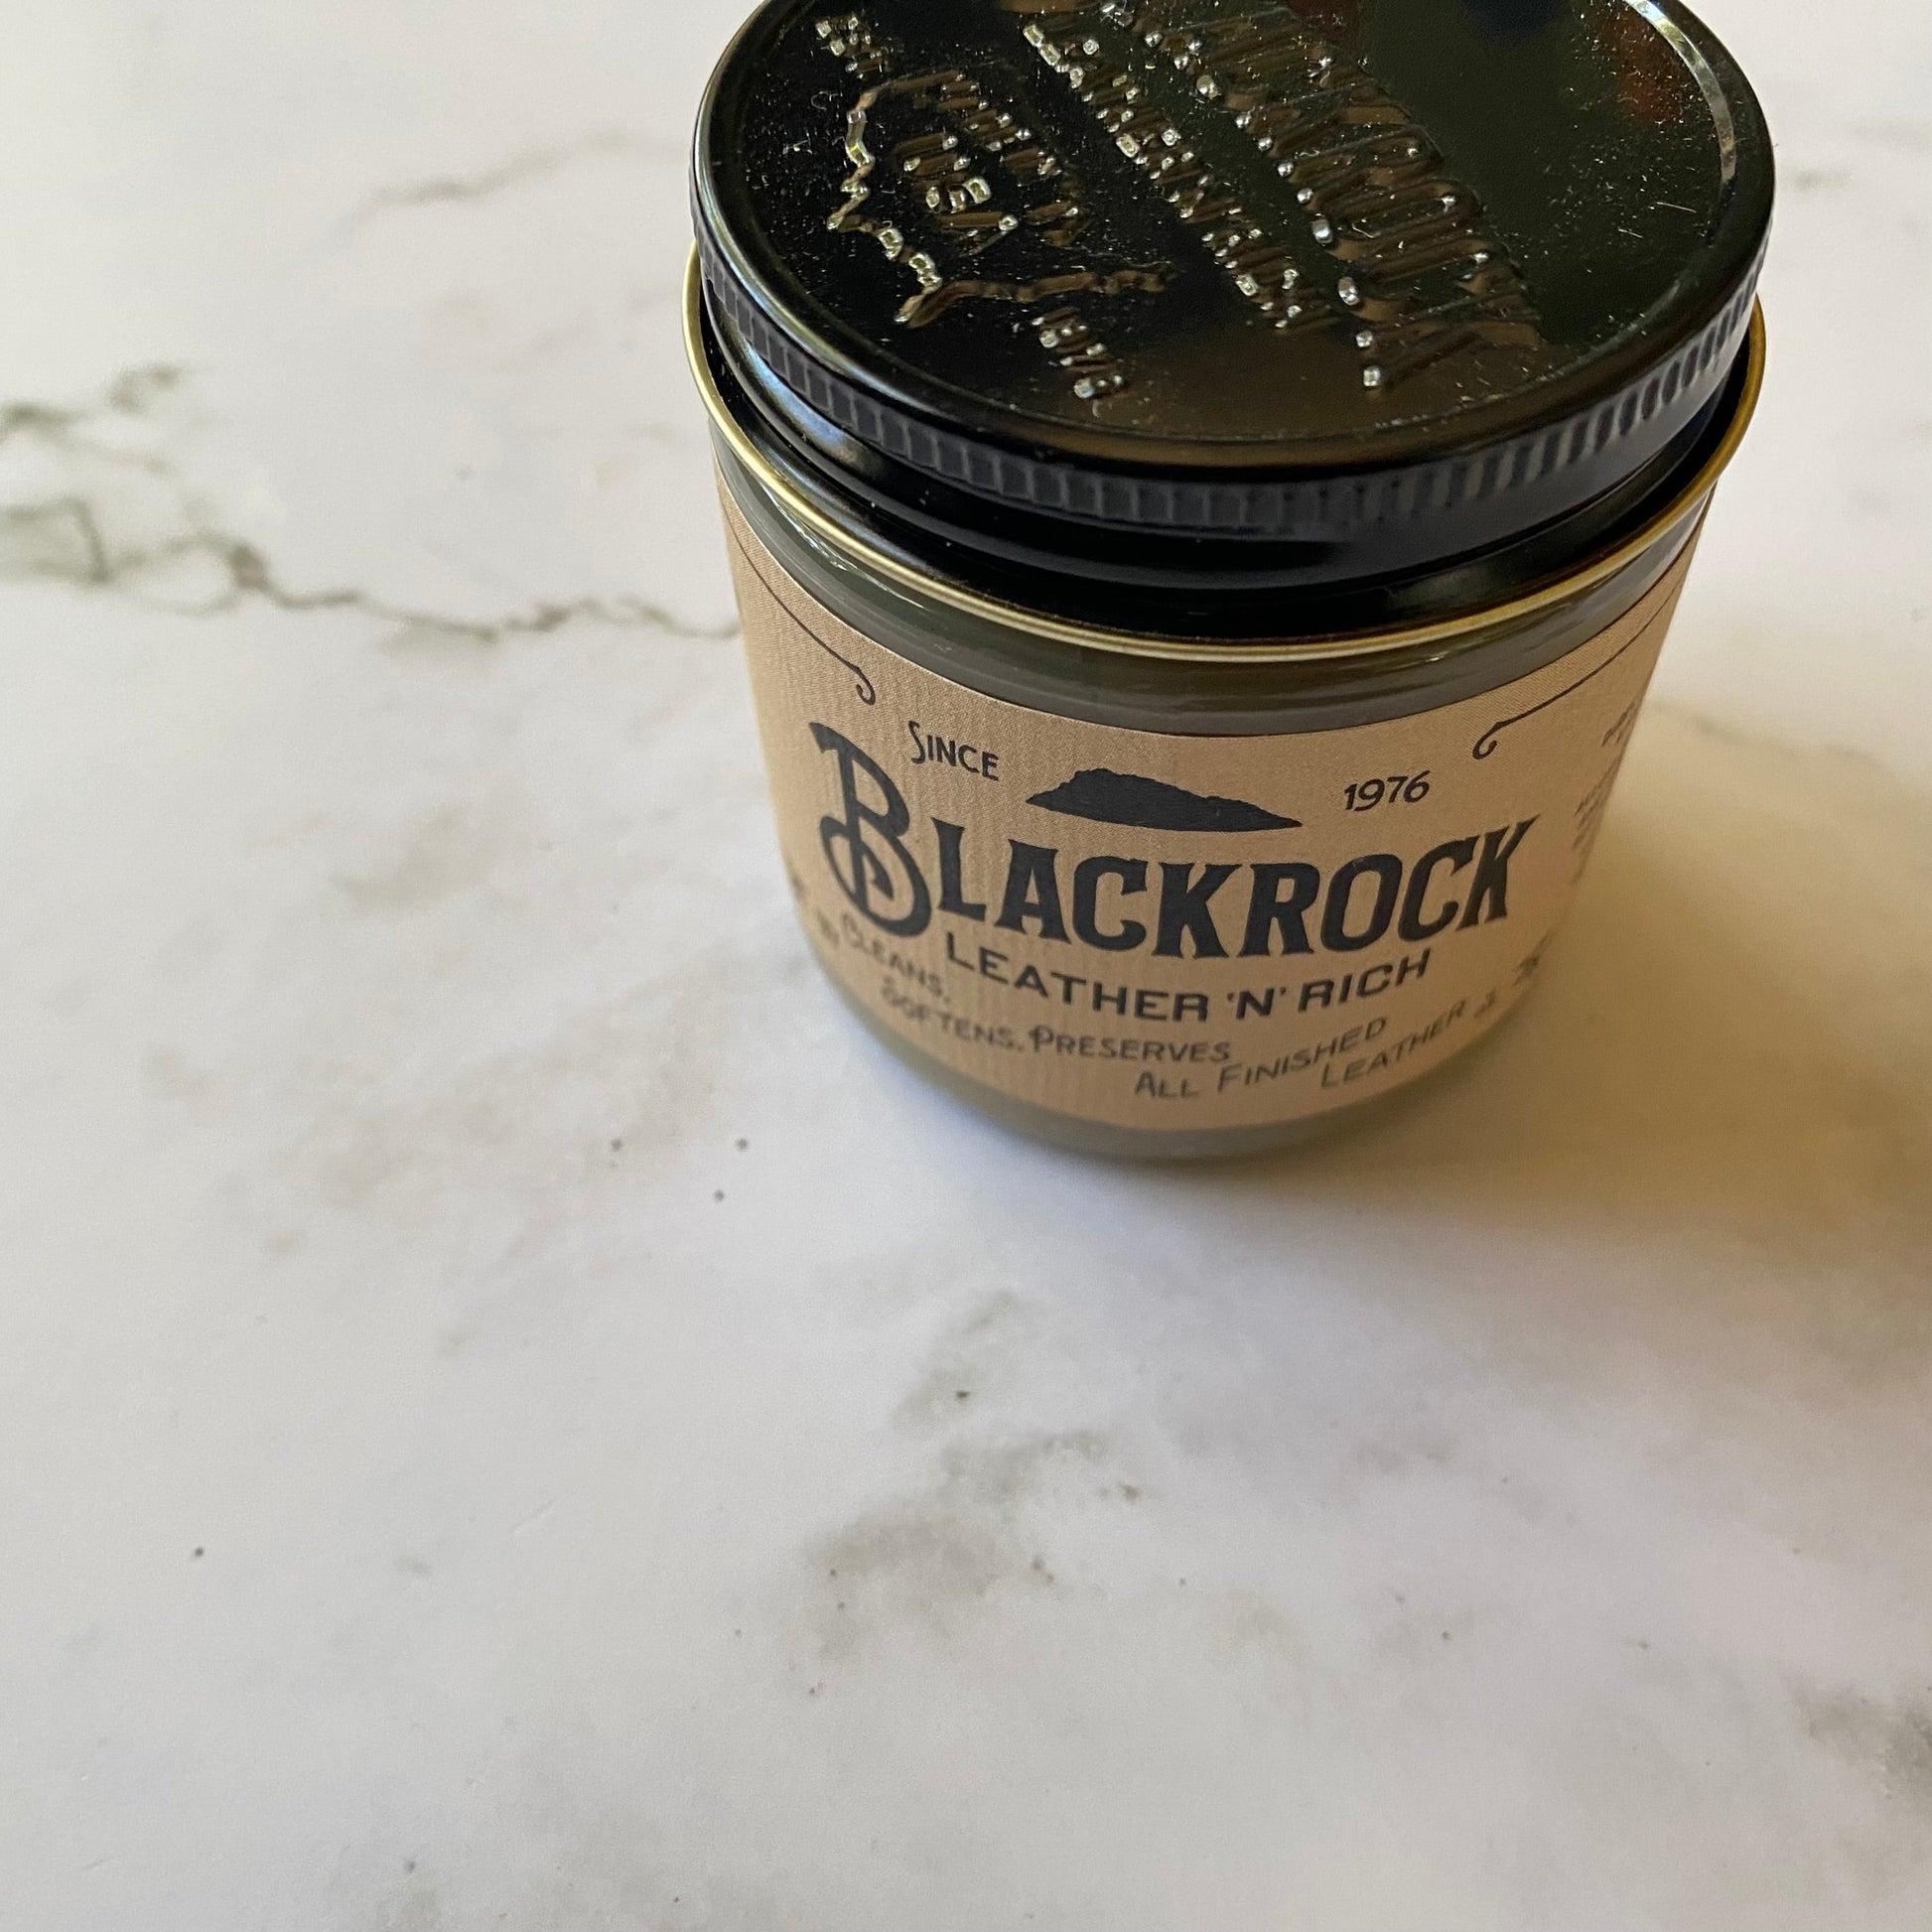 Blackrock Leather -The best and I have tried many California, Leather, new, wallet Chaio Leather Goods -leather care